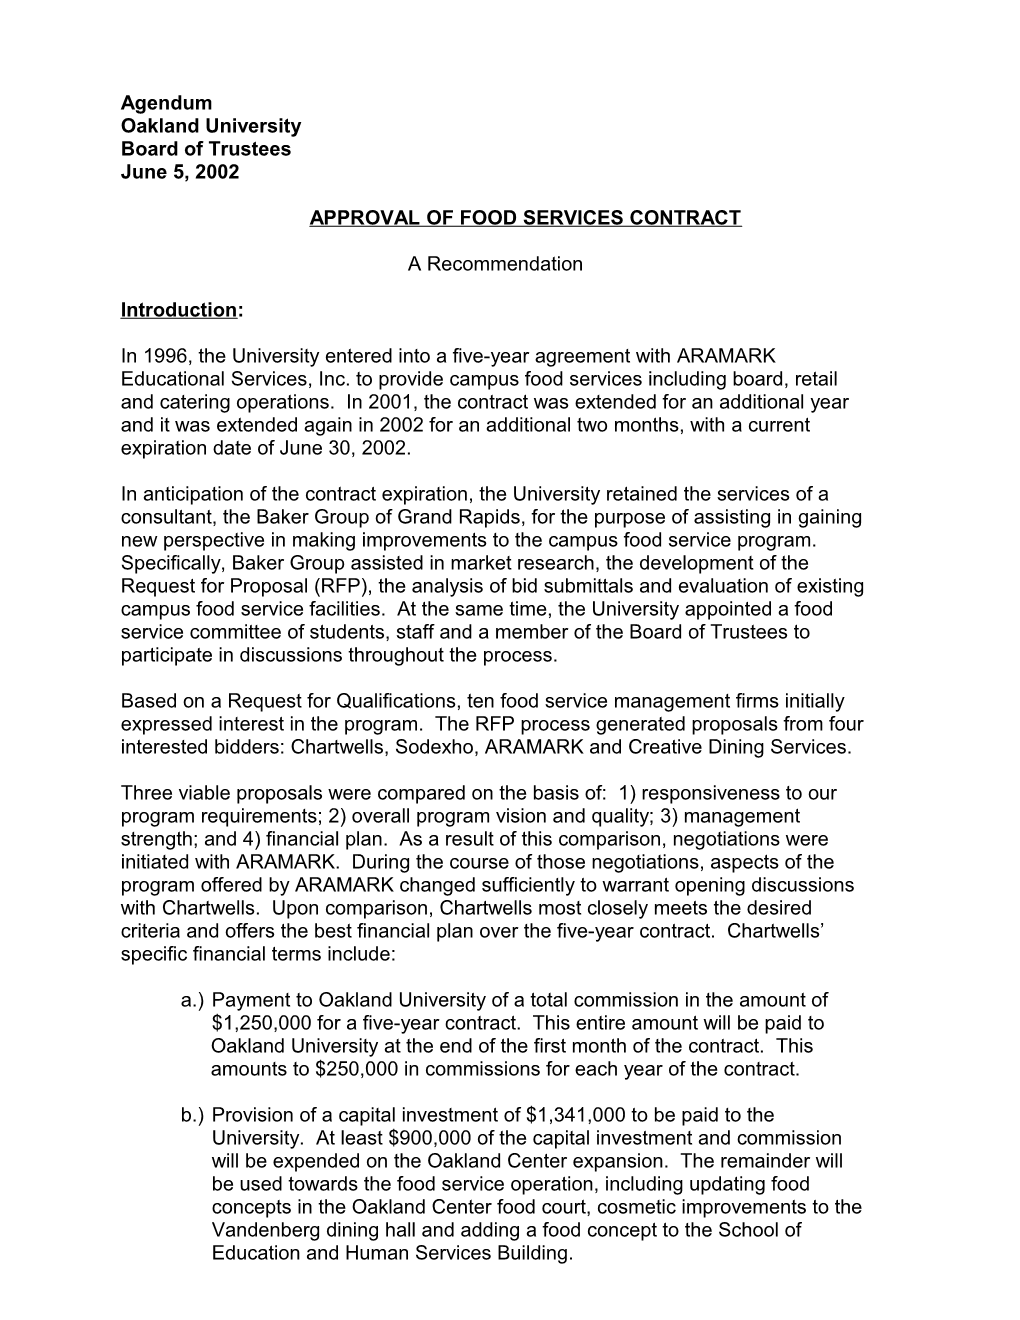 Approval of Food Services Contract